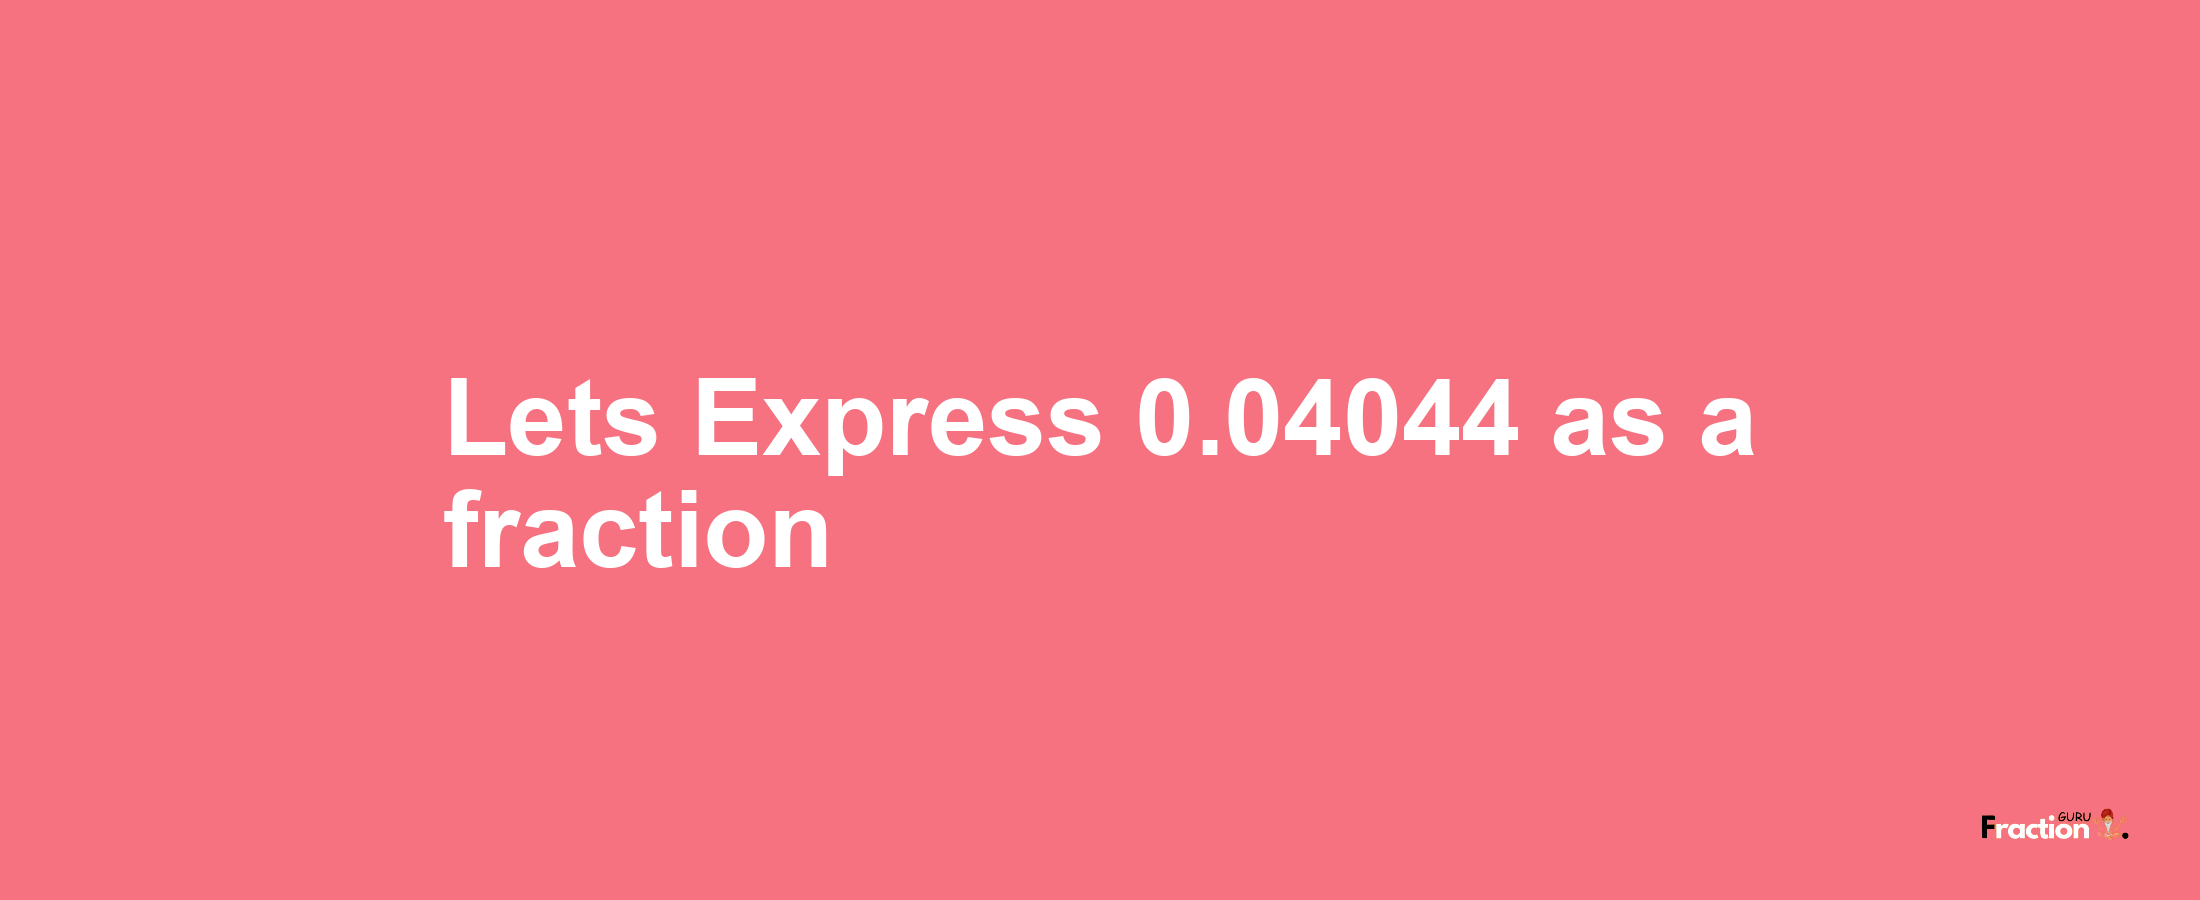 Lets Express 0.04044 as afraction